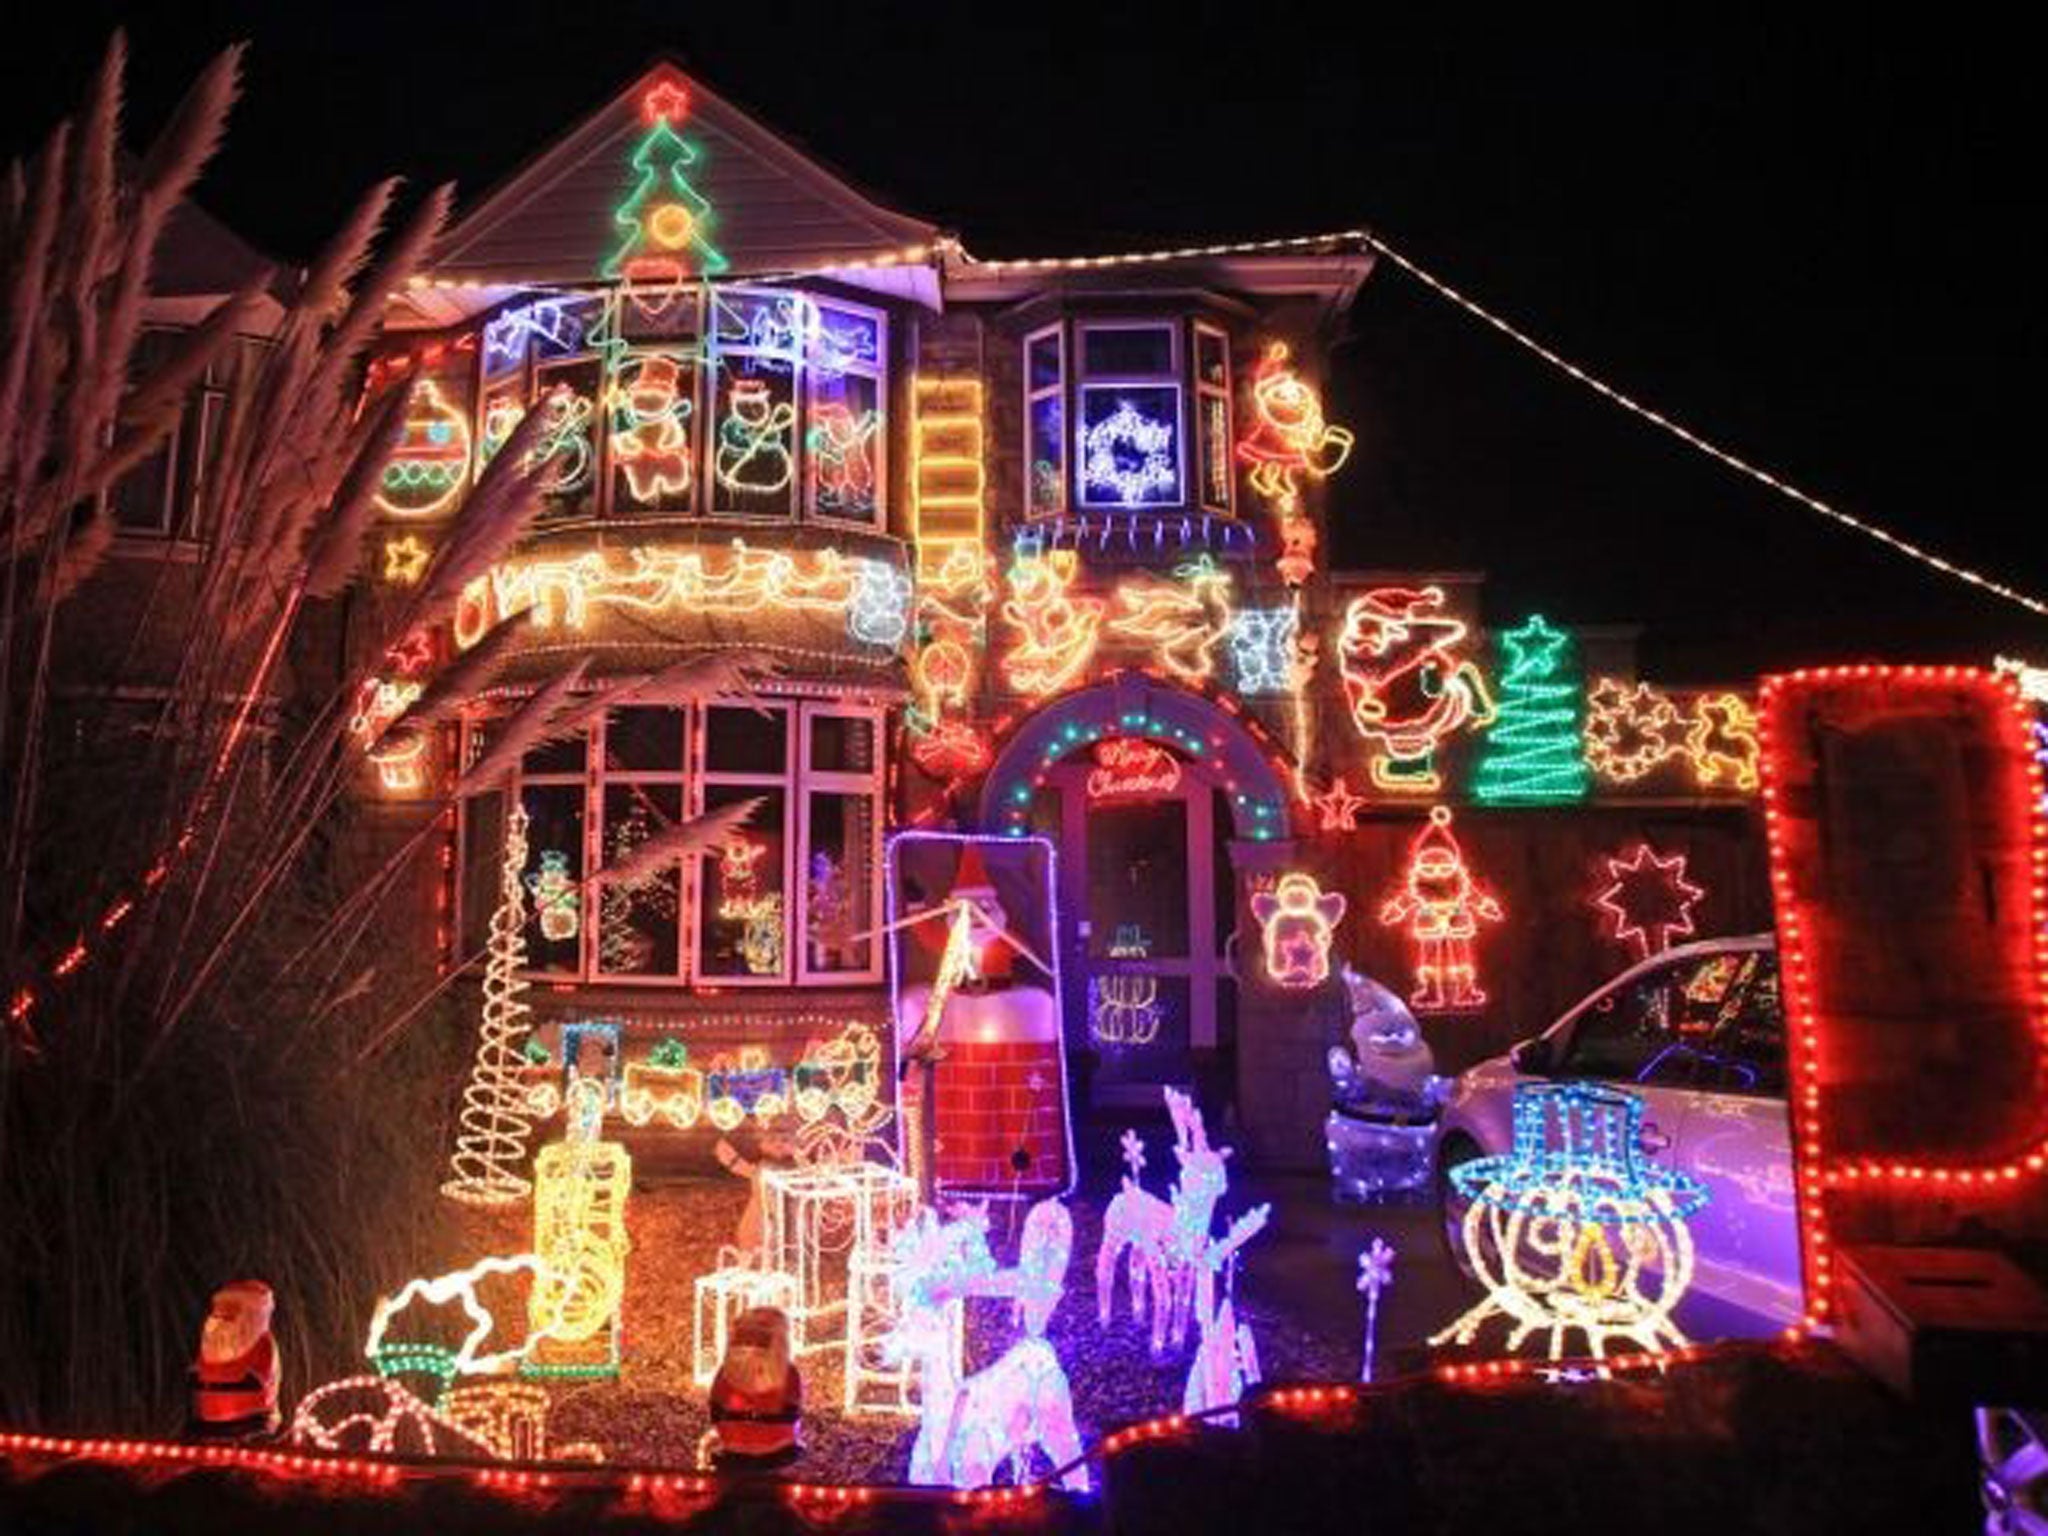 The lights were on but no one was home as Extra Energy failed to change an inflated bill